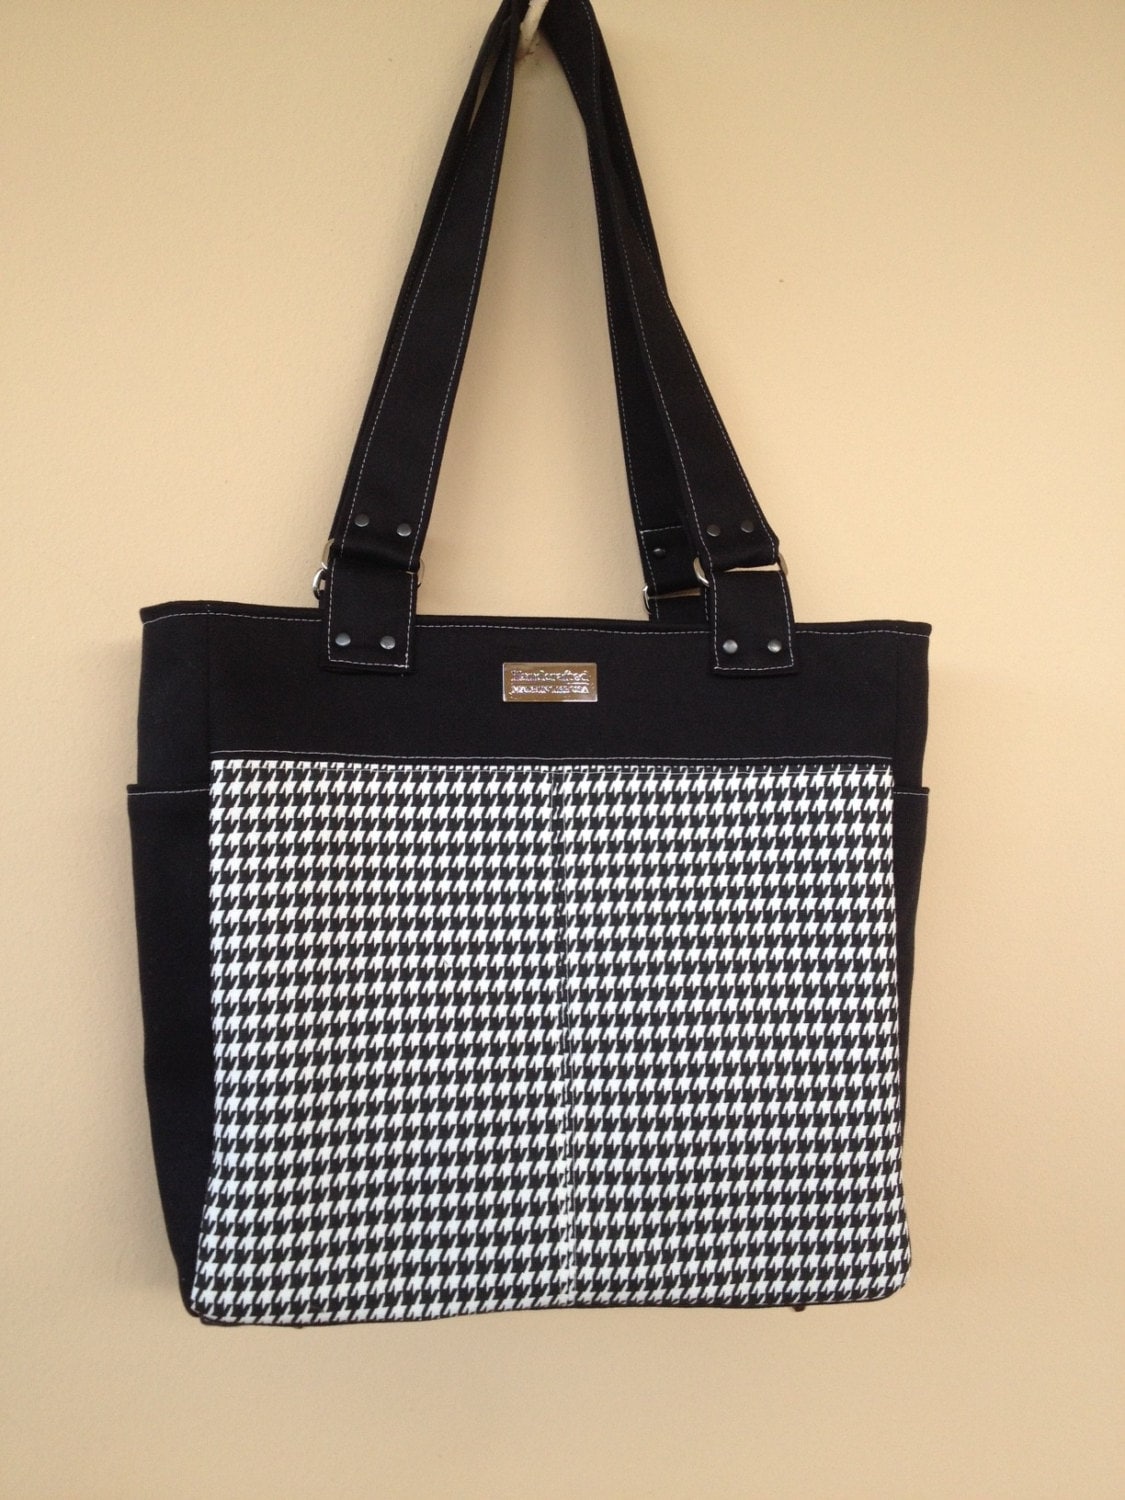 Black and White Bag Houndstooth Shoulder Purse Large Fabric